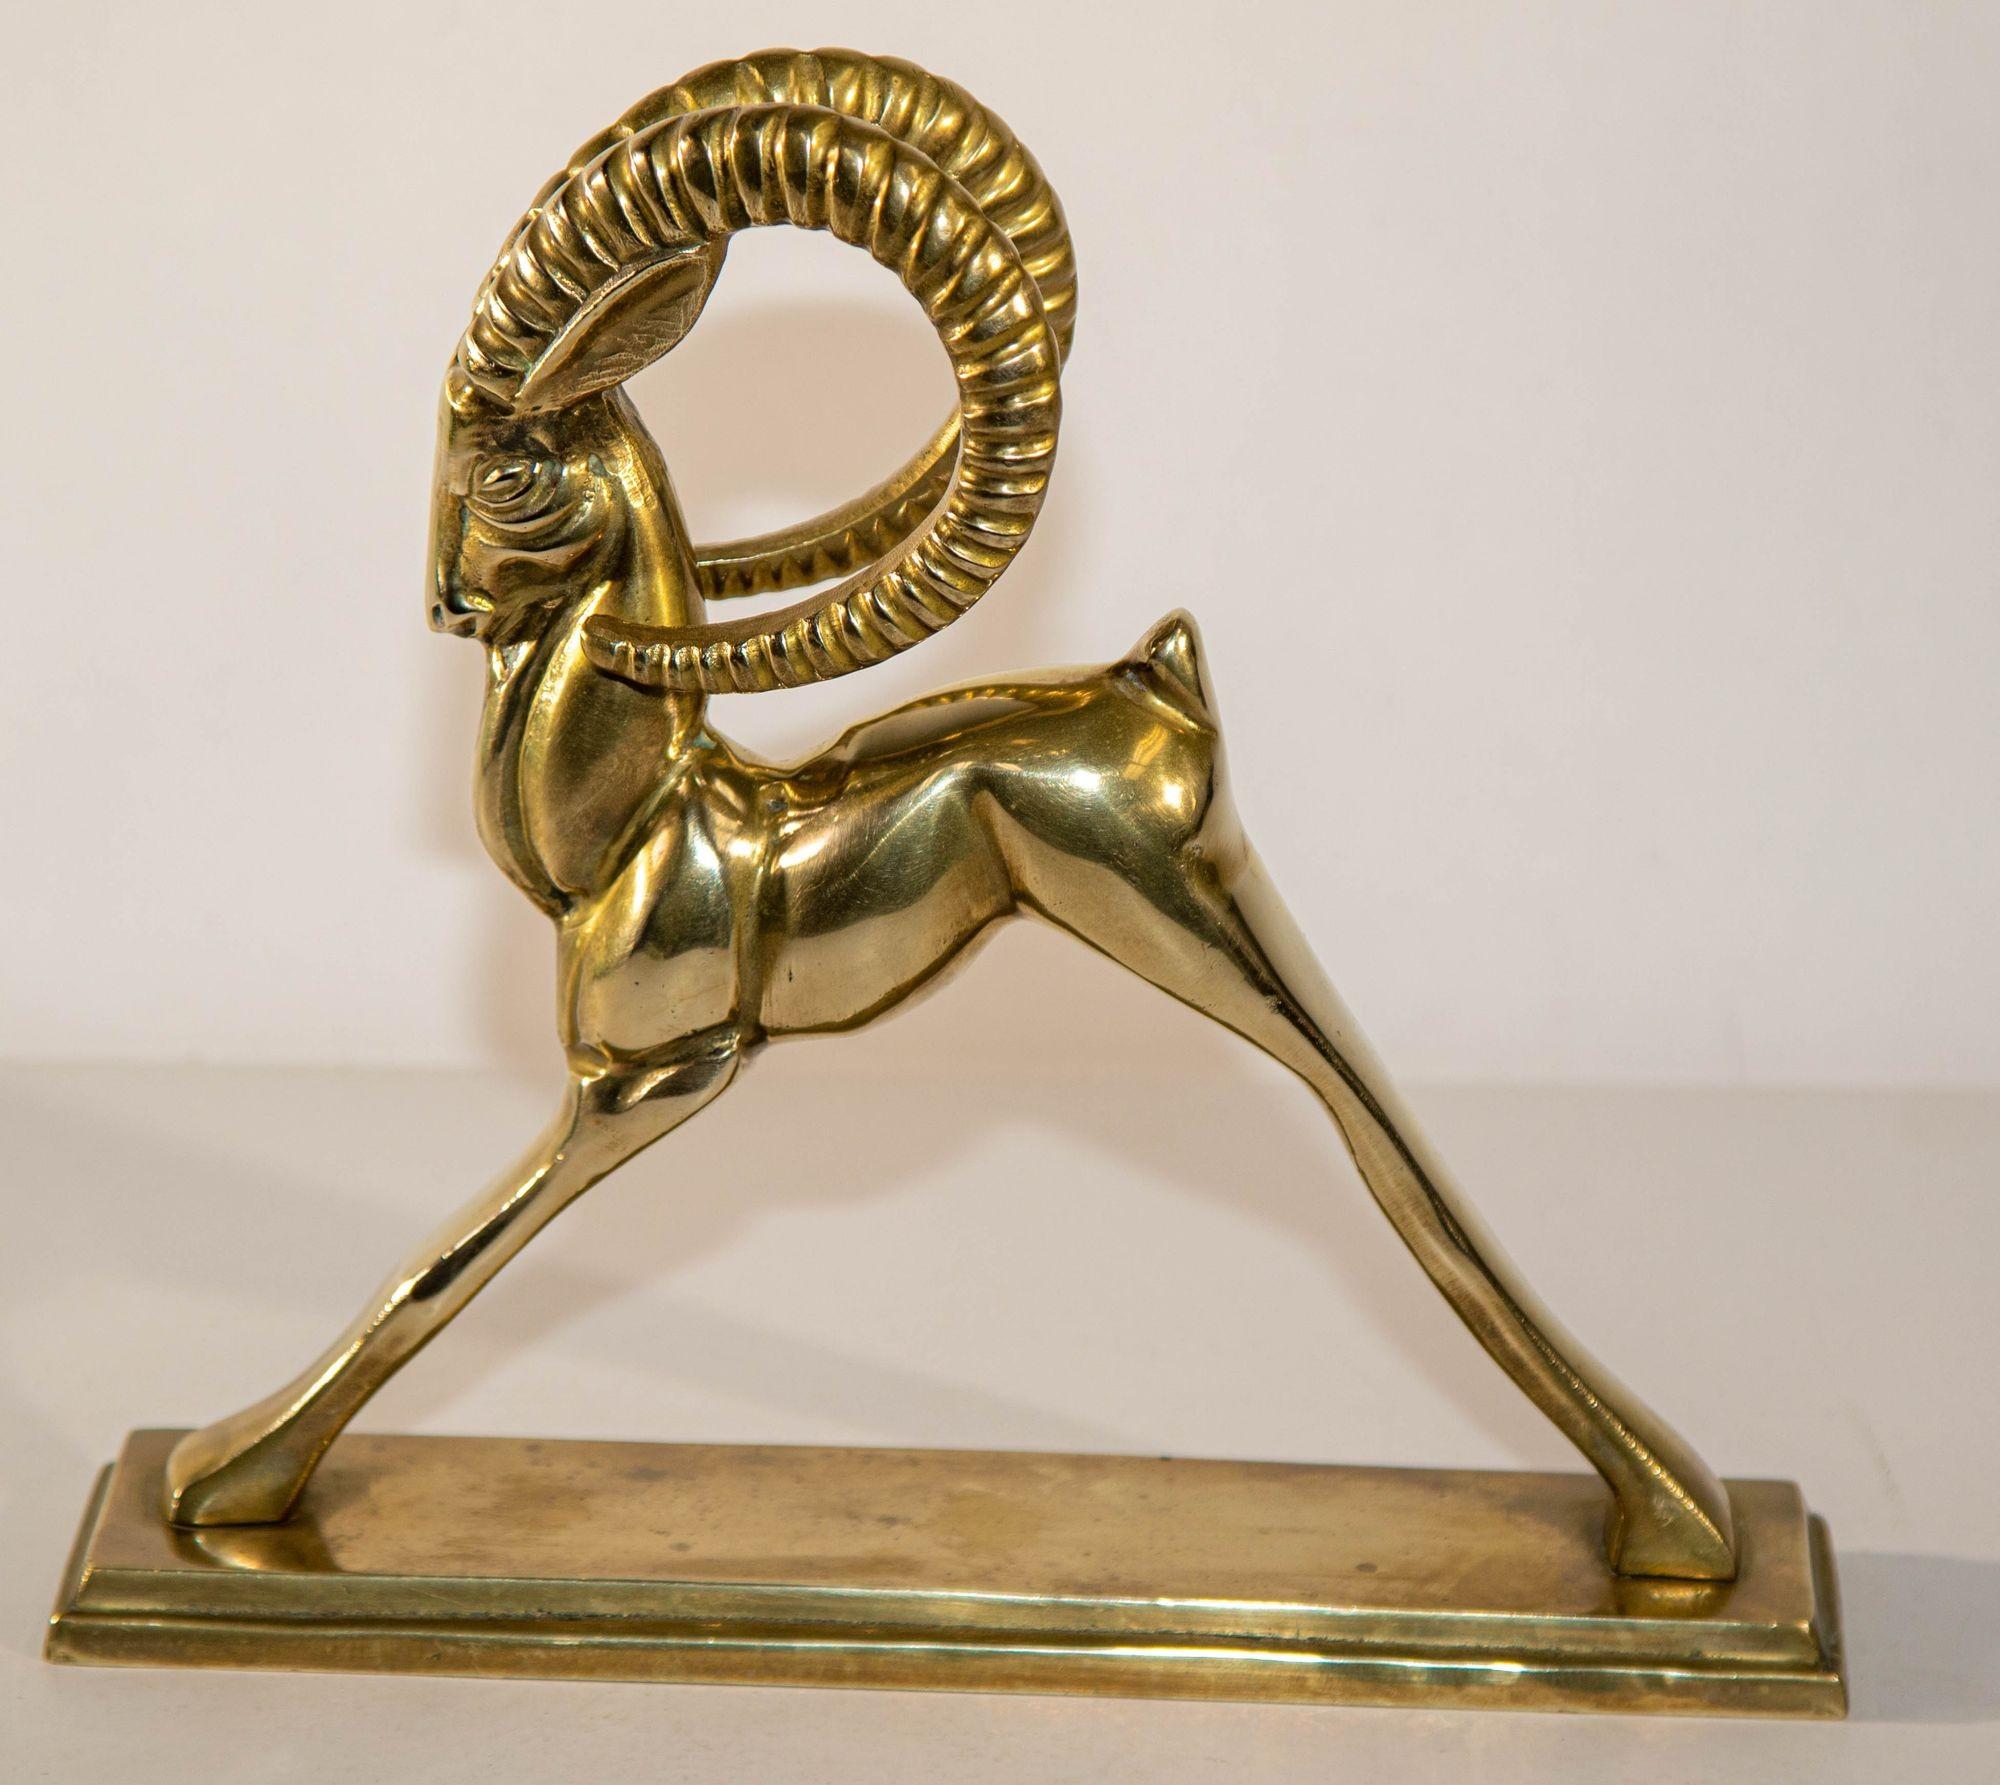 Cast Vintage French Art Deco Style Sculpture of Brass Ibex Antelope For Sale